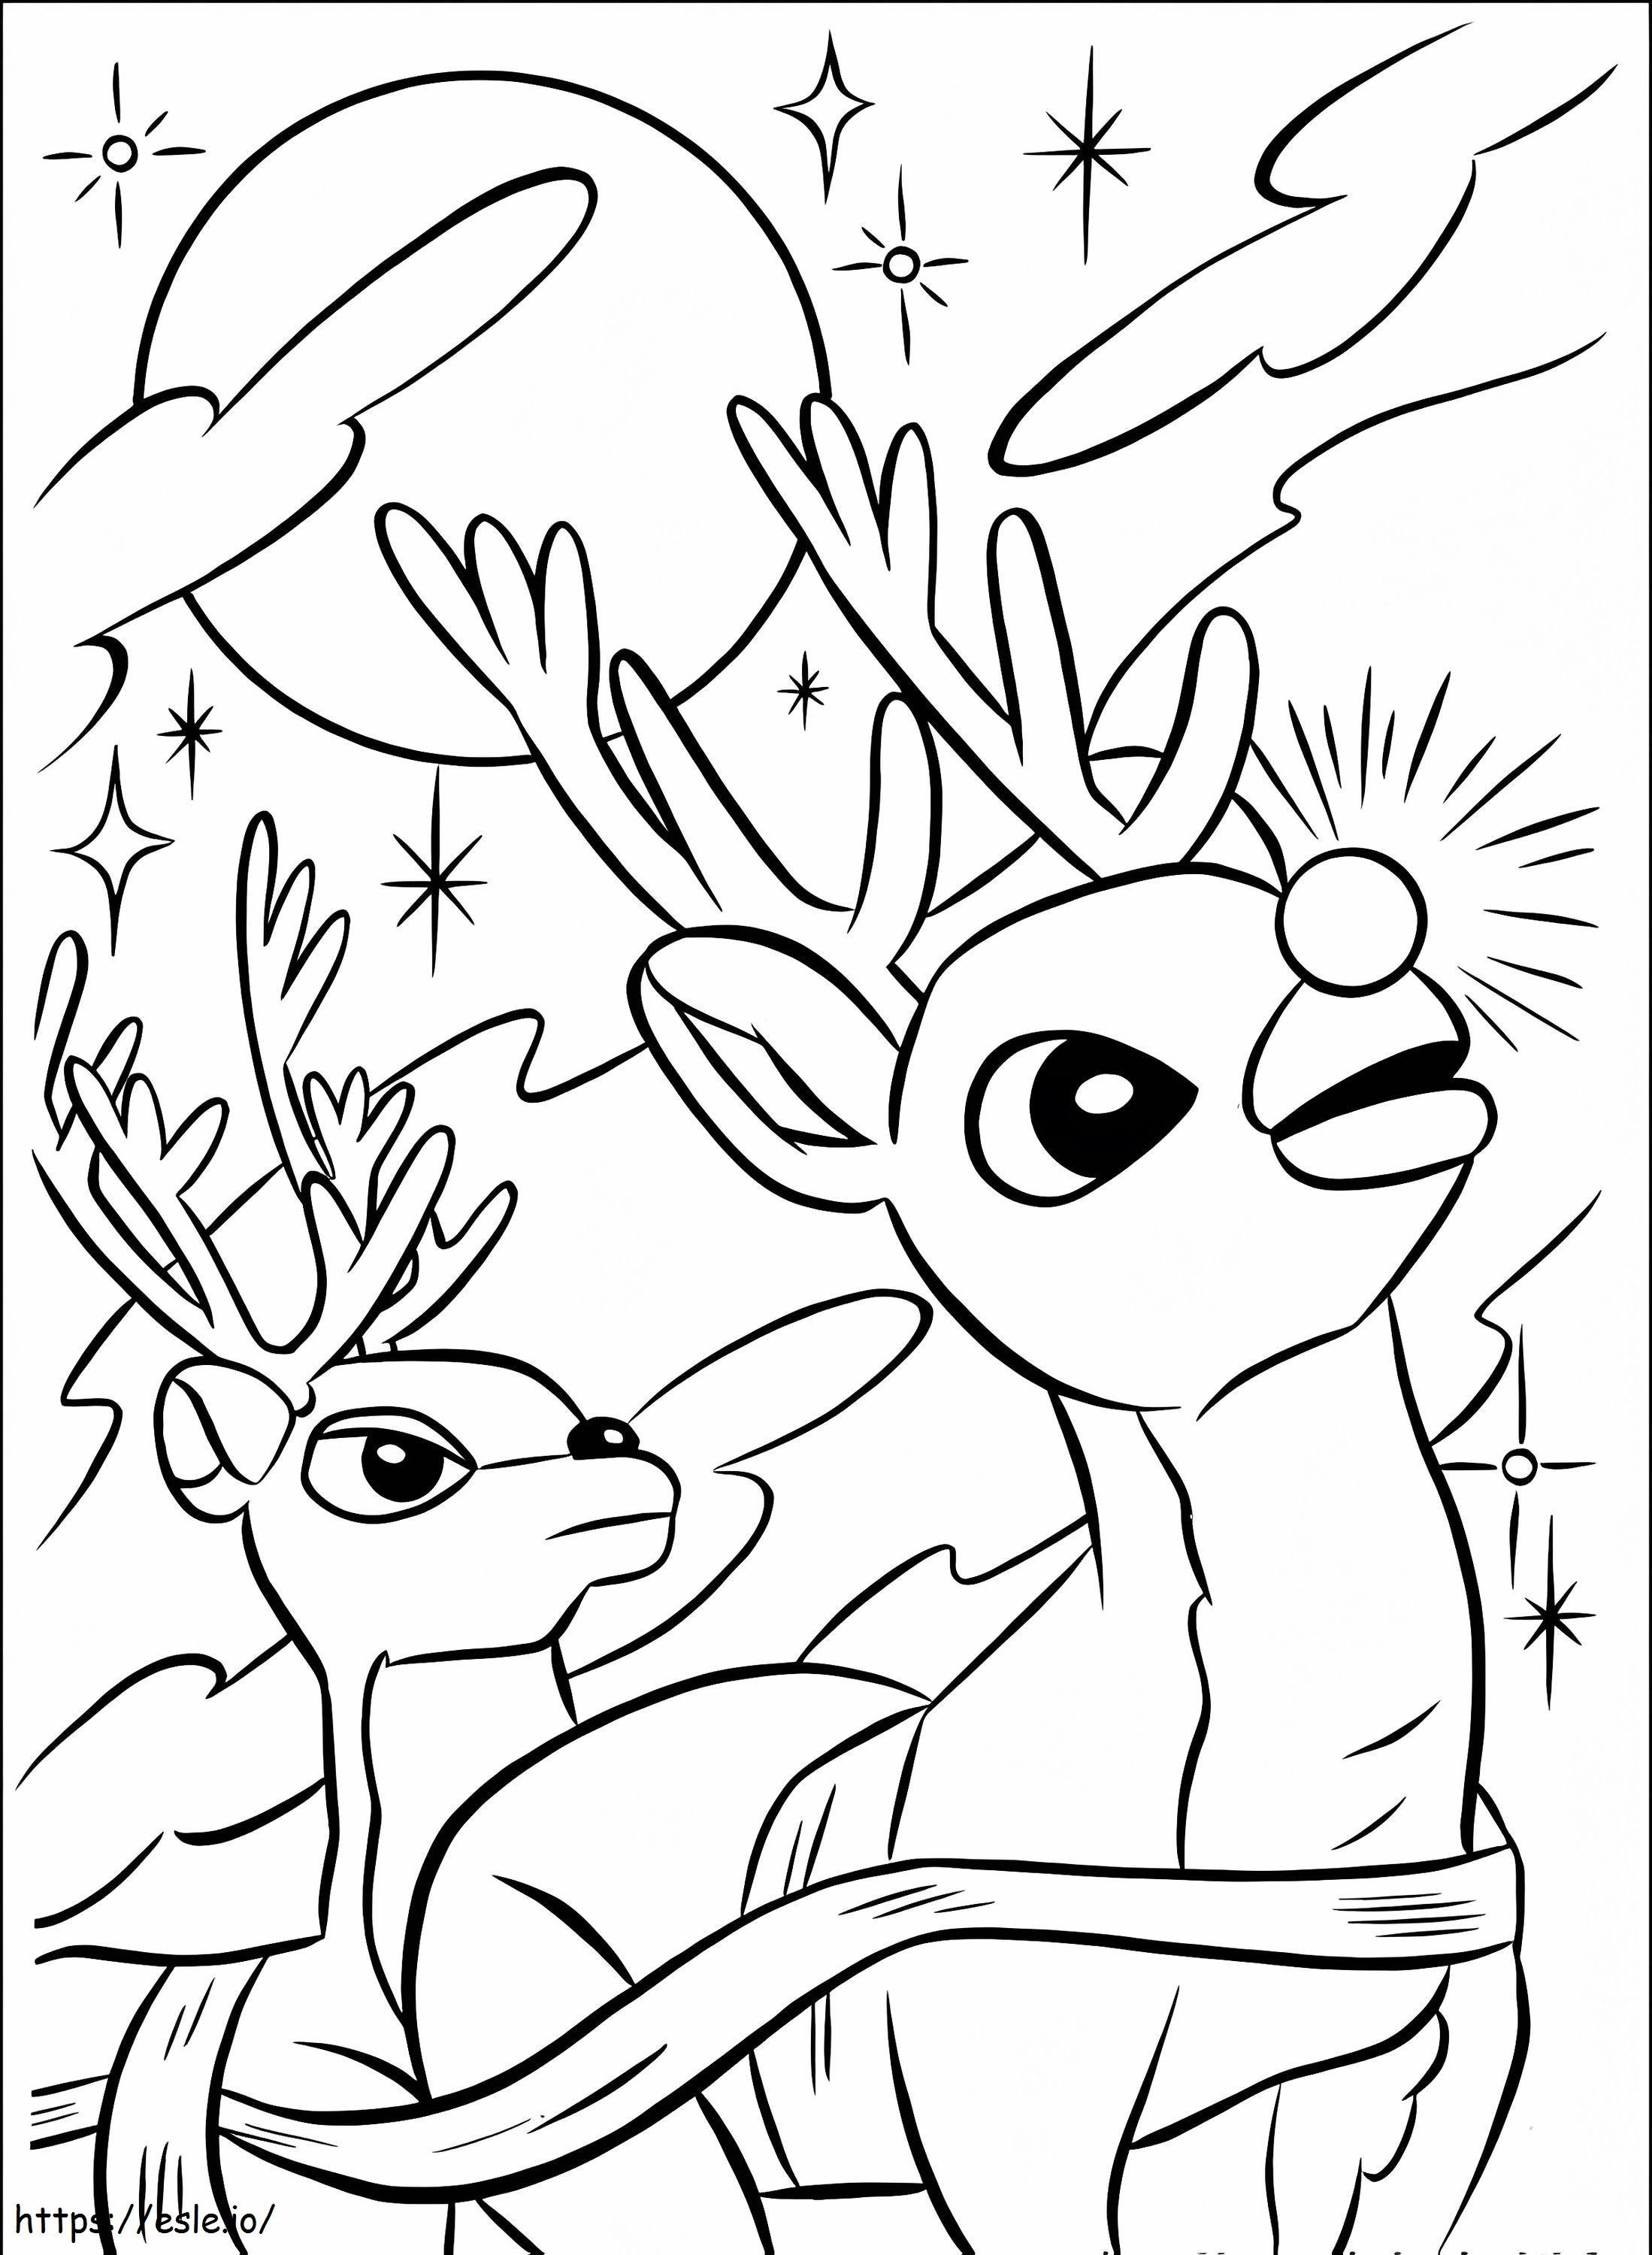 Rudolph And His Friends Look At The Sky coloring page